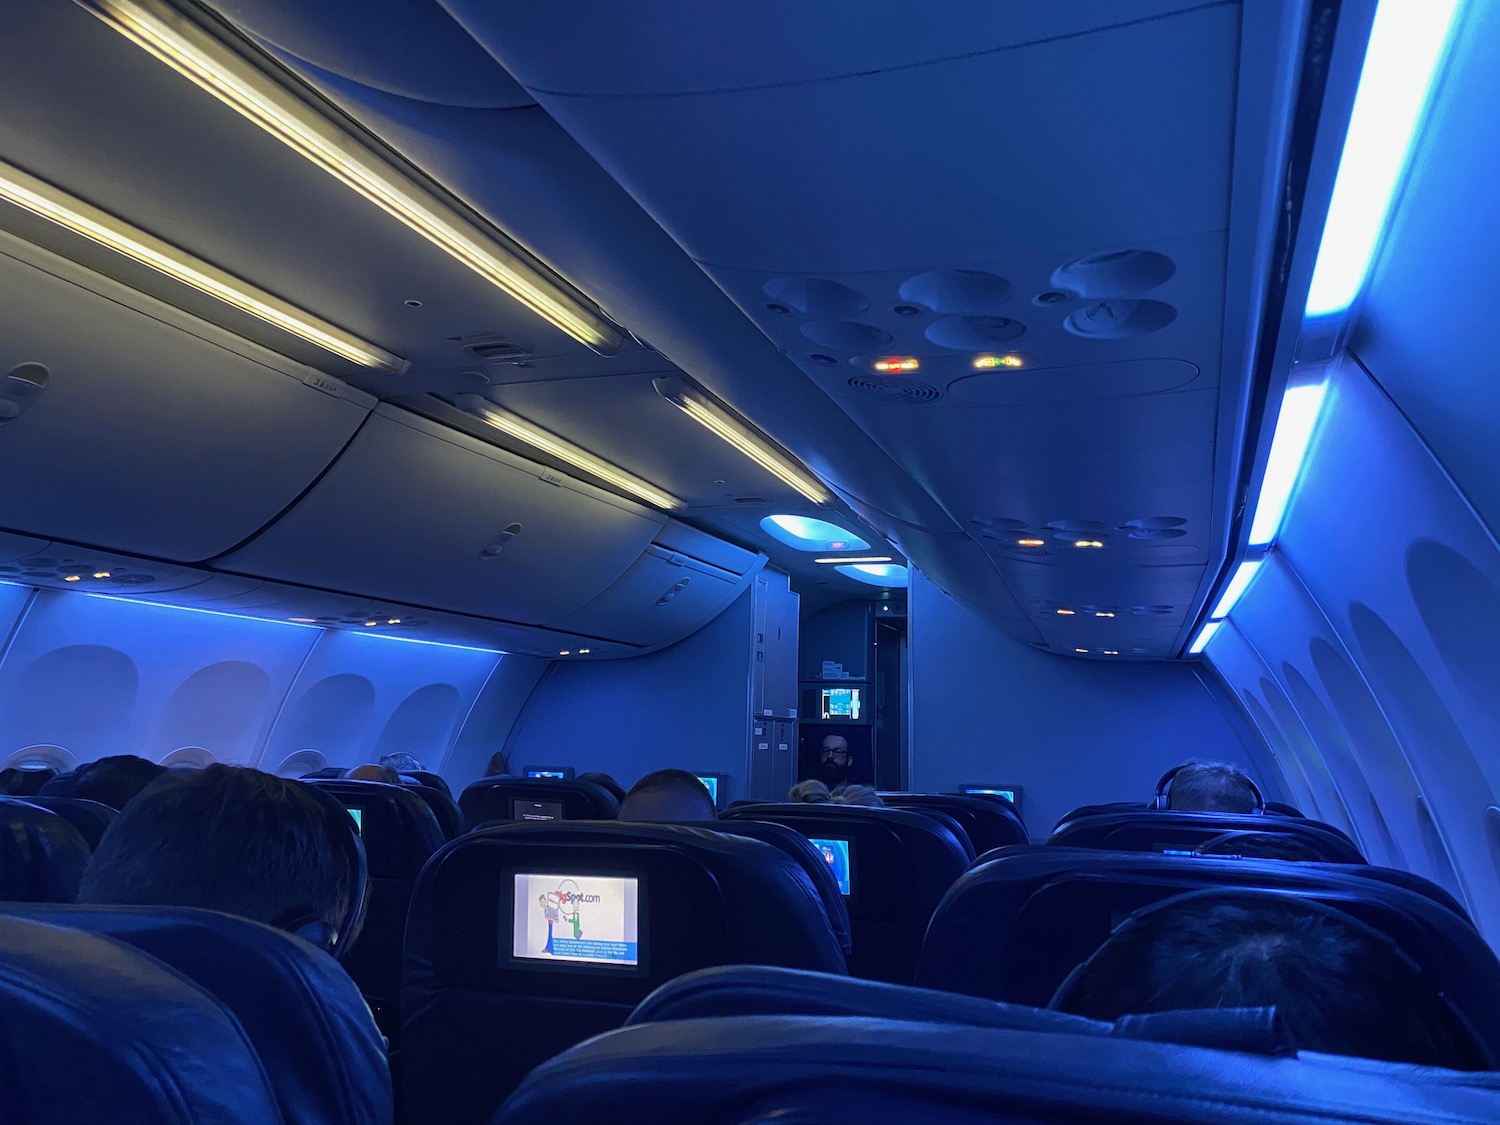 Review: United Airlines 737-900 First Class - Live and Let's Fly